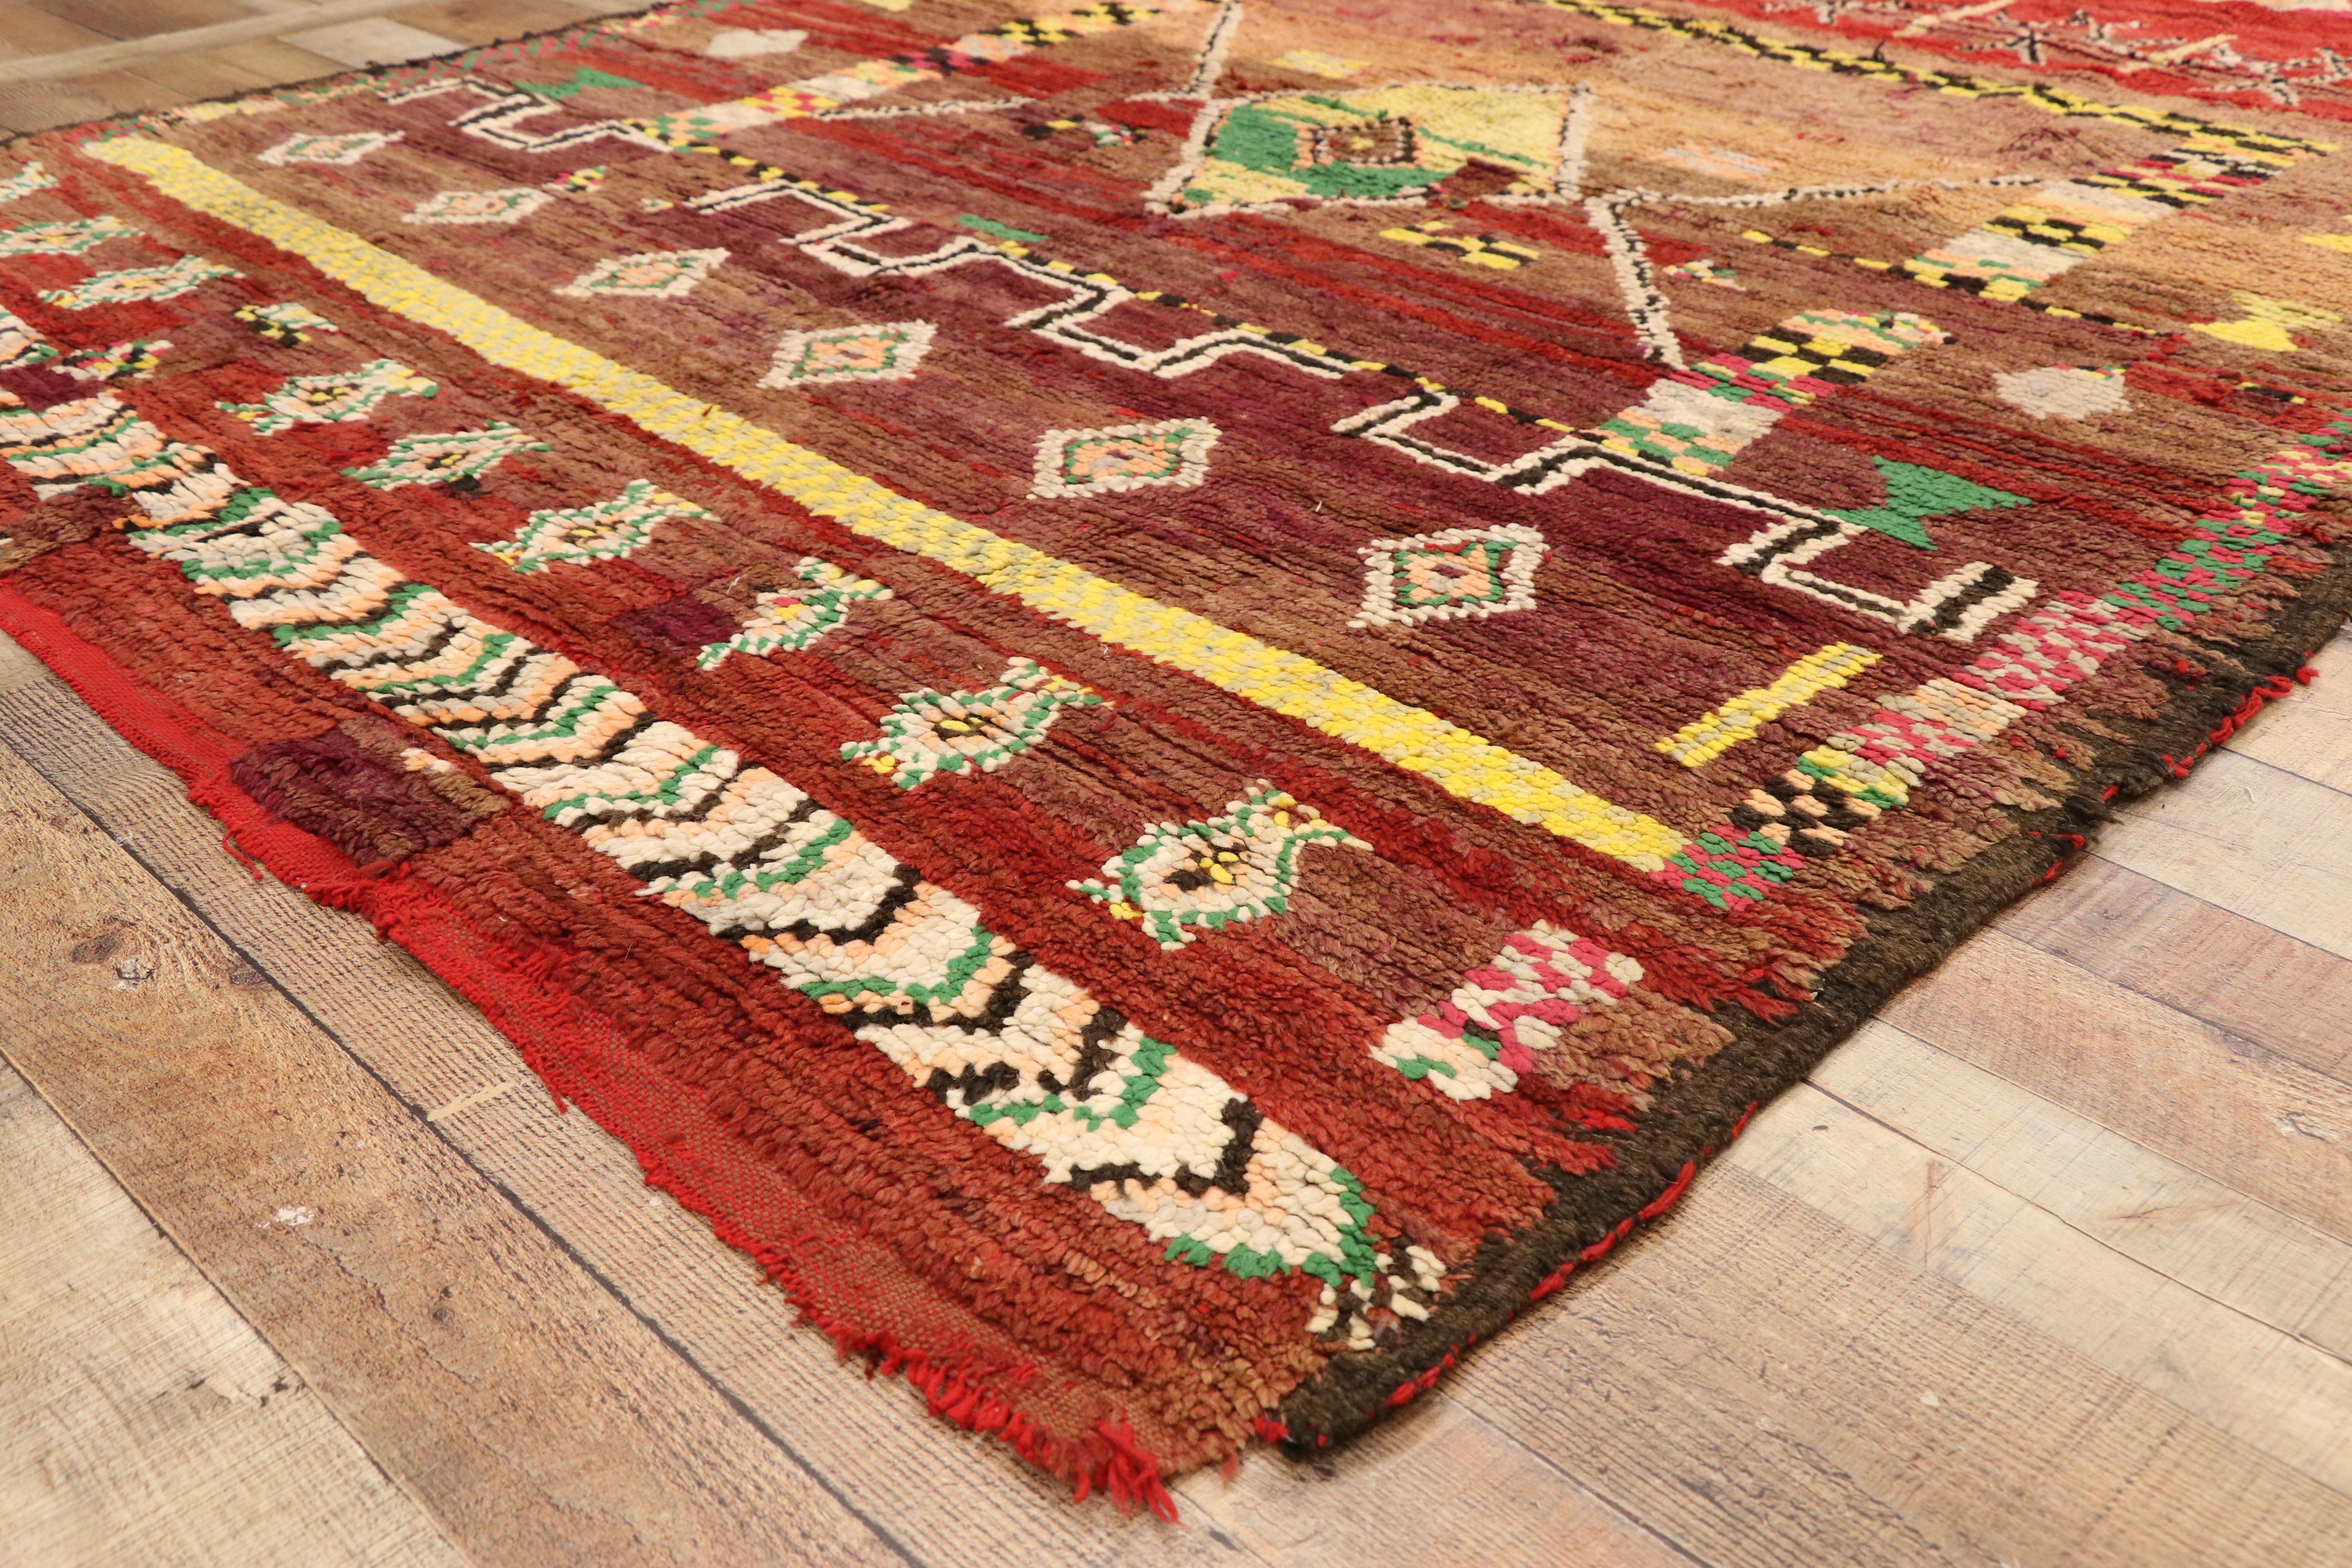 Vintage Berber Moroccan Rug with Tribal Artisan Style In Good Condition For Sale In Dallas, TX